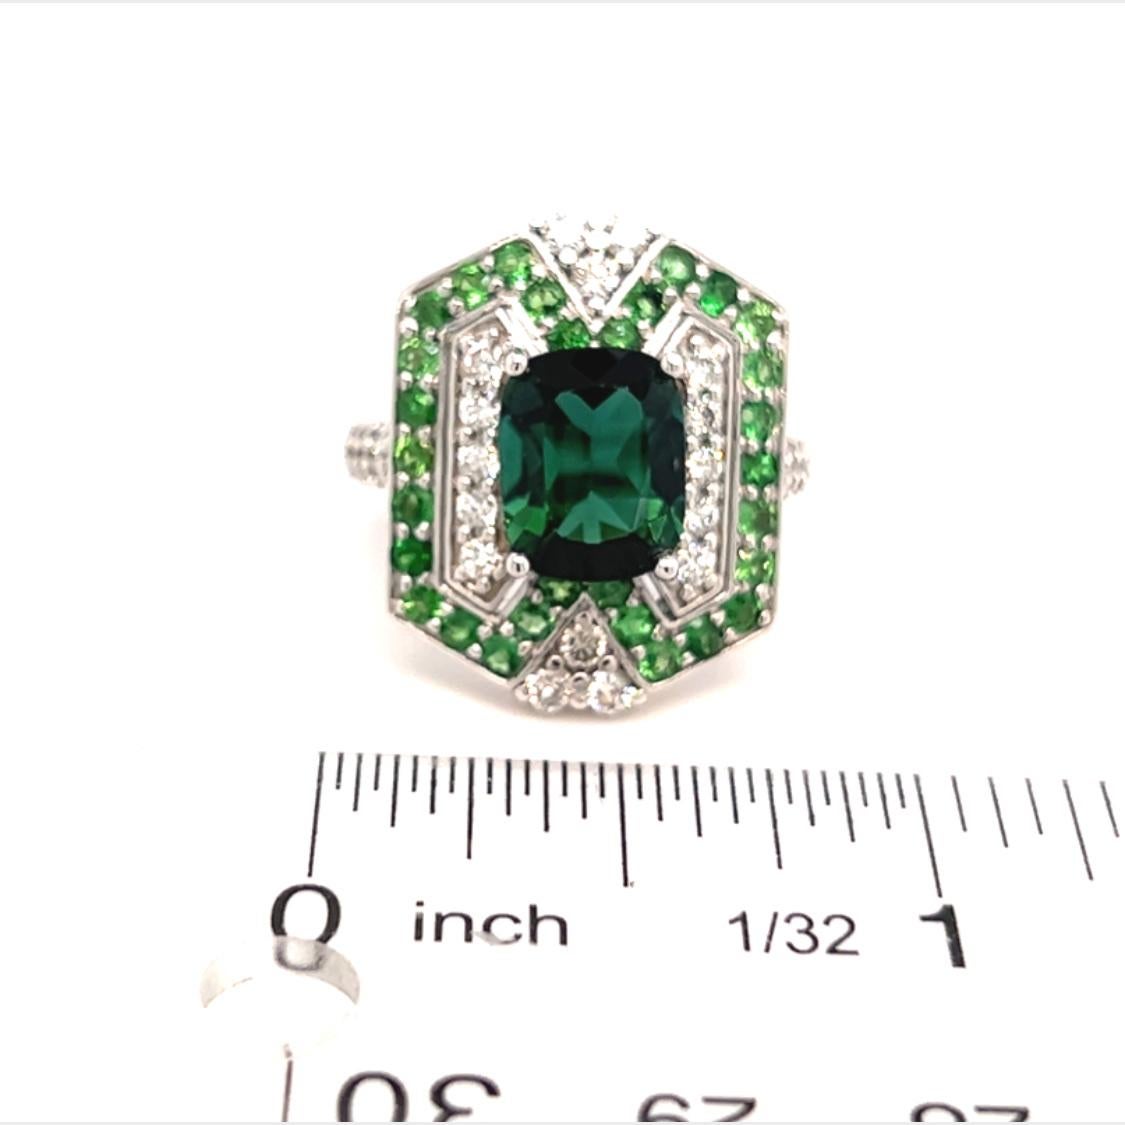 Tourmaline Tsavorite Diamond Ring 14k Gold 5.55 TCW GIA Certified In New Condition For Sale In Brooklyn, NY